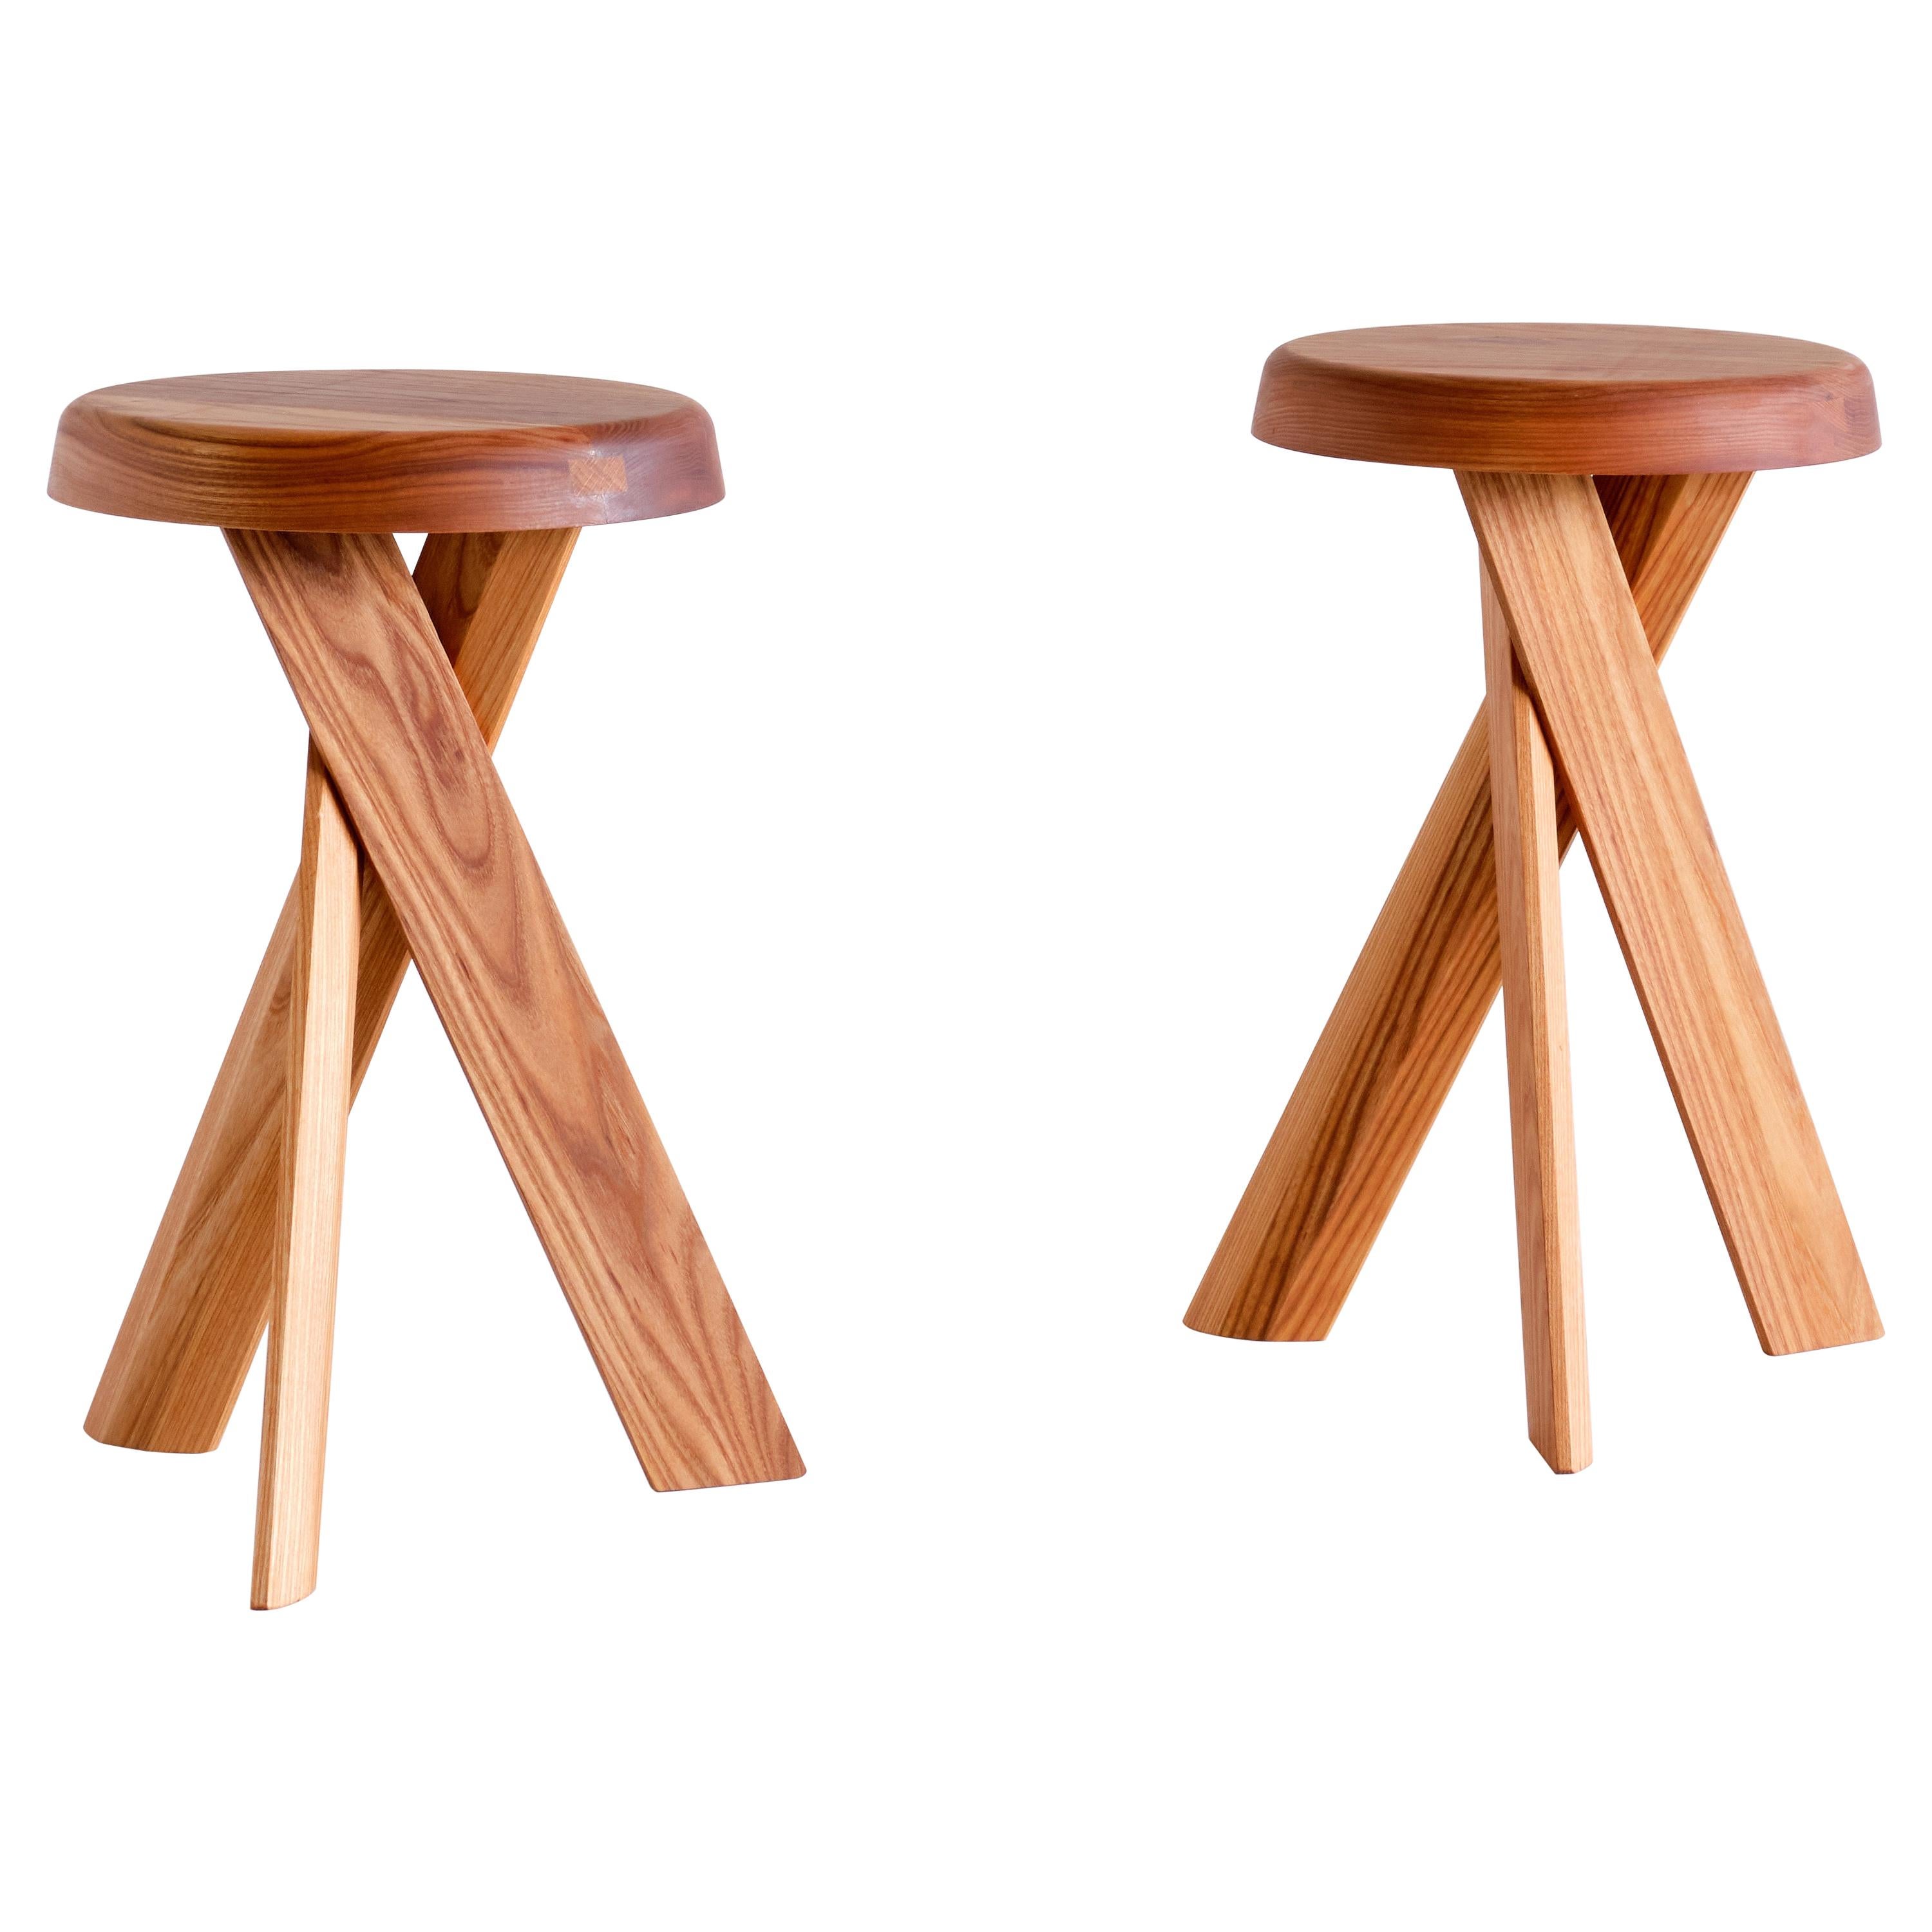 This striking three-legged stool is the model S31 designed by Pierre Chapo in 1974. The cross legged base and round seat are in solid elm wood. This stool also (could work) works well as a small side table.

We have three pieces in stock available